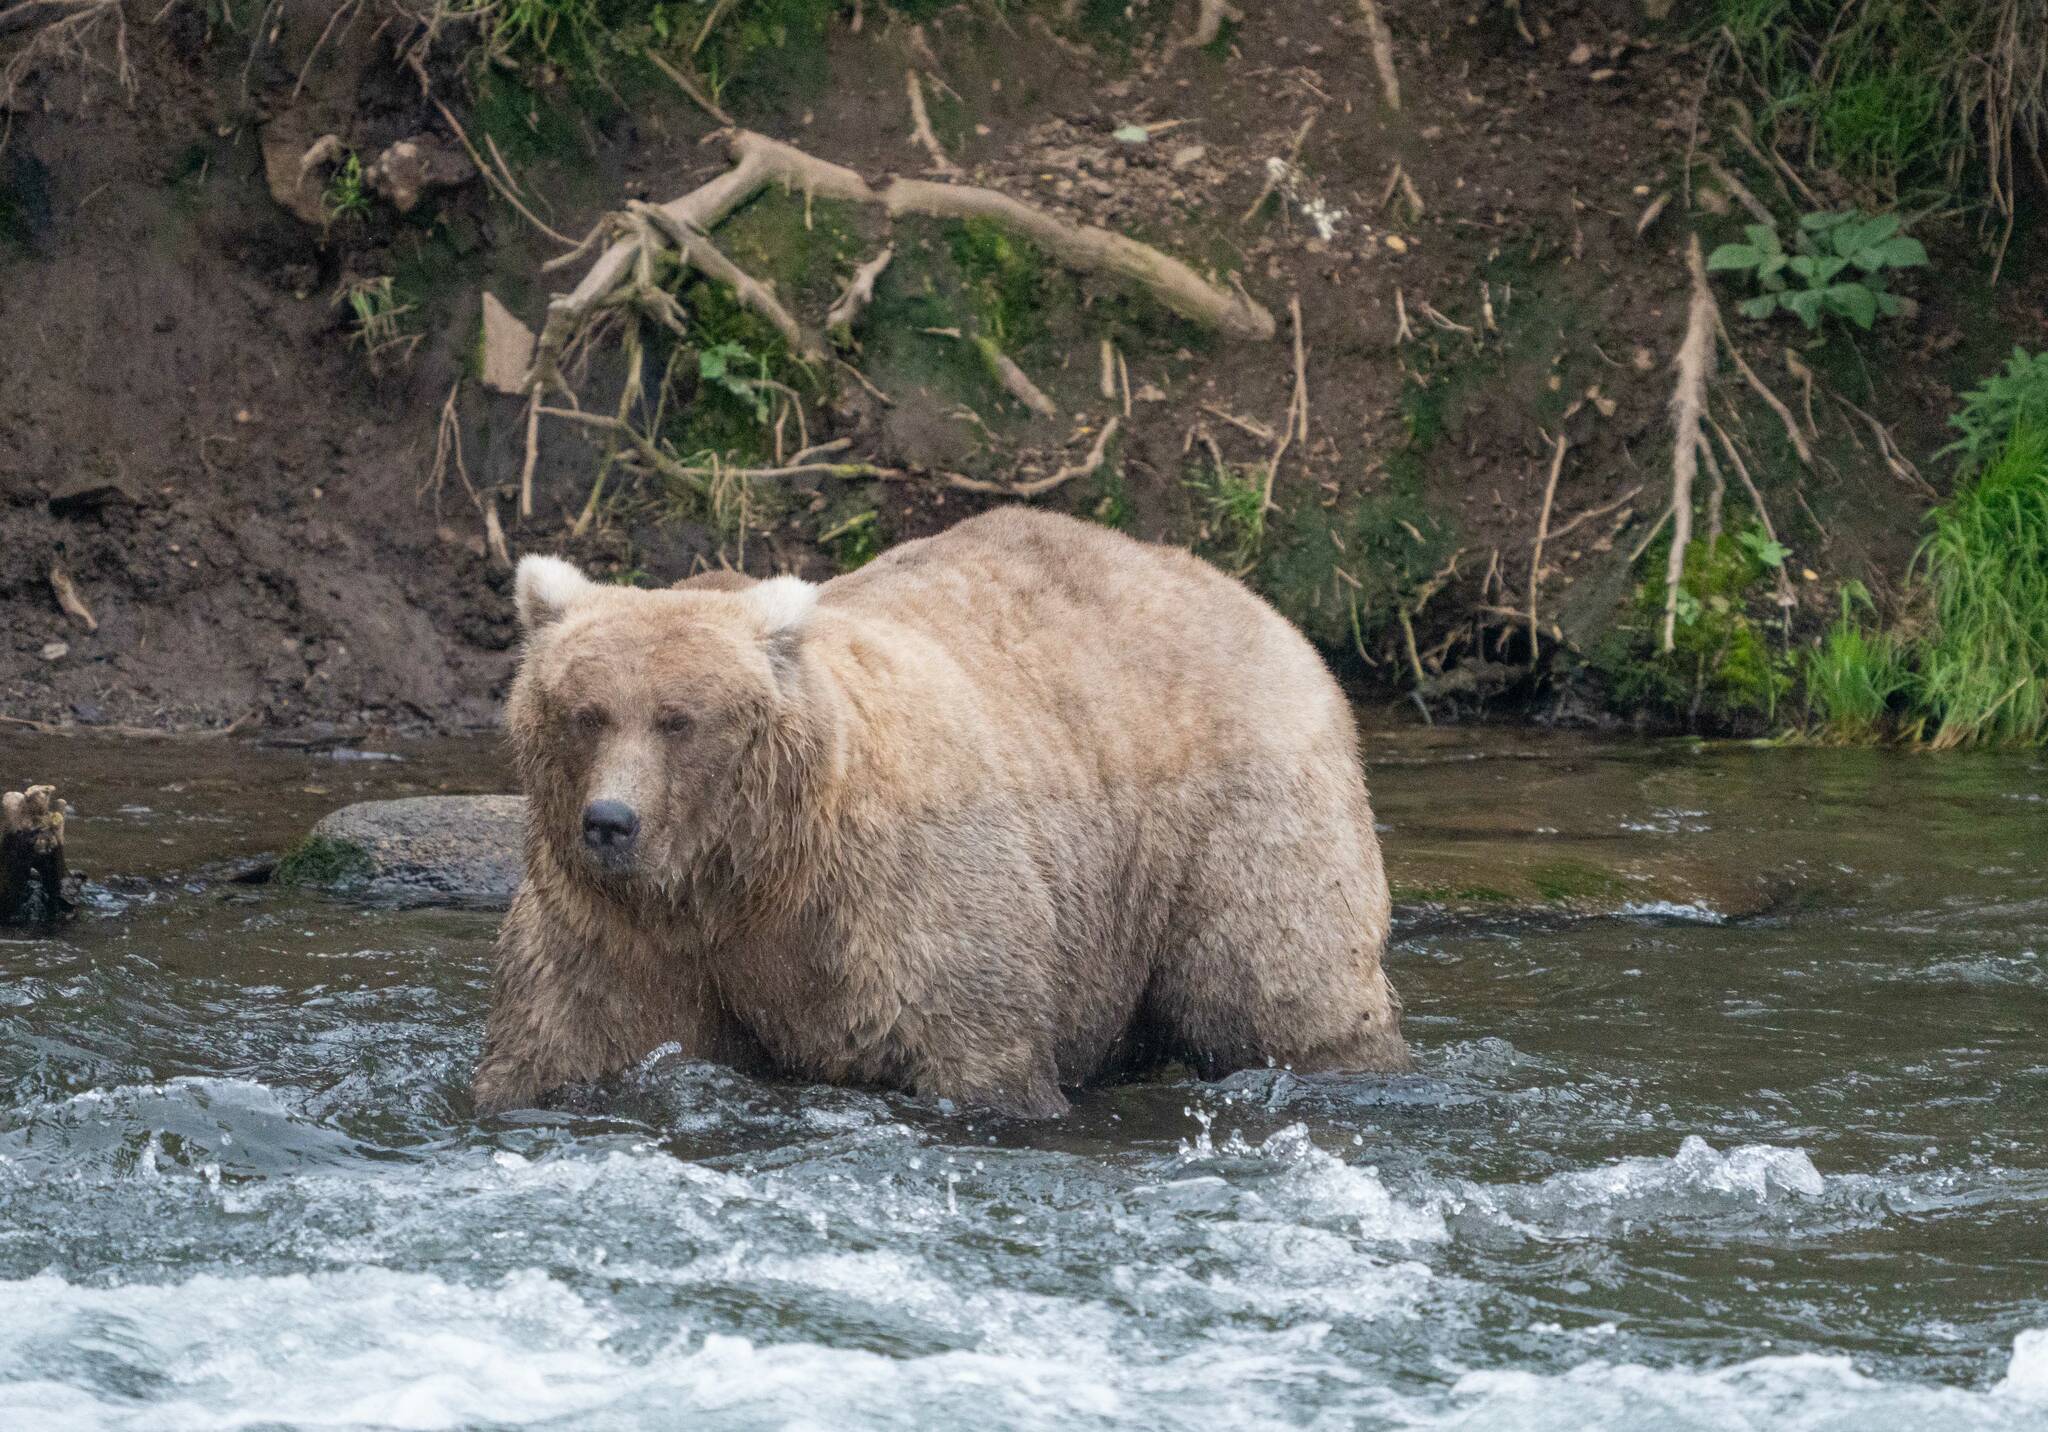 Bear 128 Grazer, with her recognizable blonde ears, wades through the water of the Brooks River in Katmai National Park, Alaska. On Thursday, she’ll compete with Bear 151 Walker to advance in Fat Bear Week. (Photo courtesy Felicia Jimenez/National Park Service)